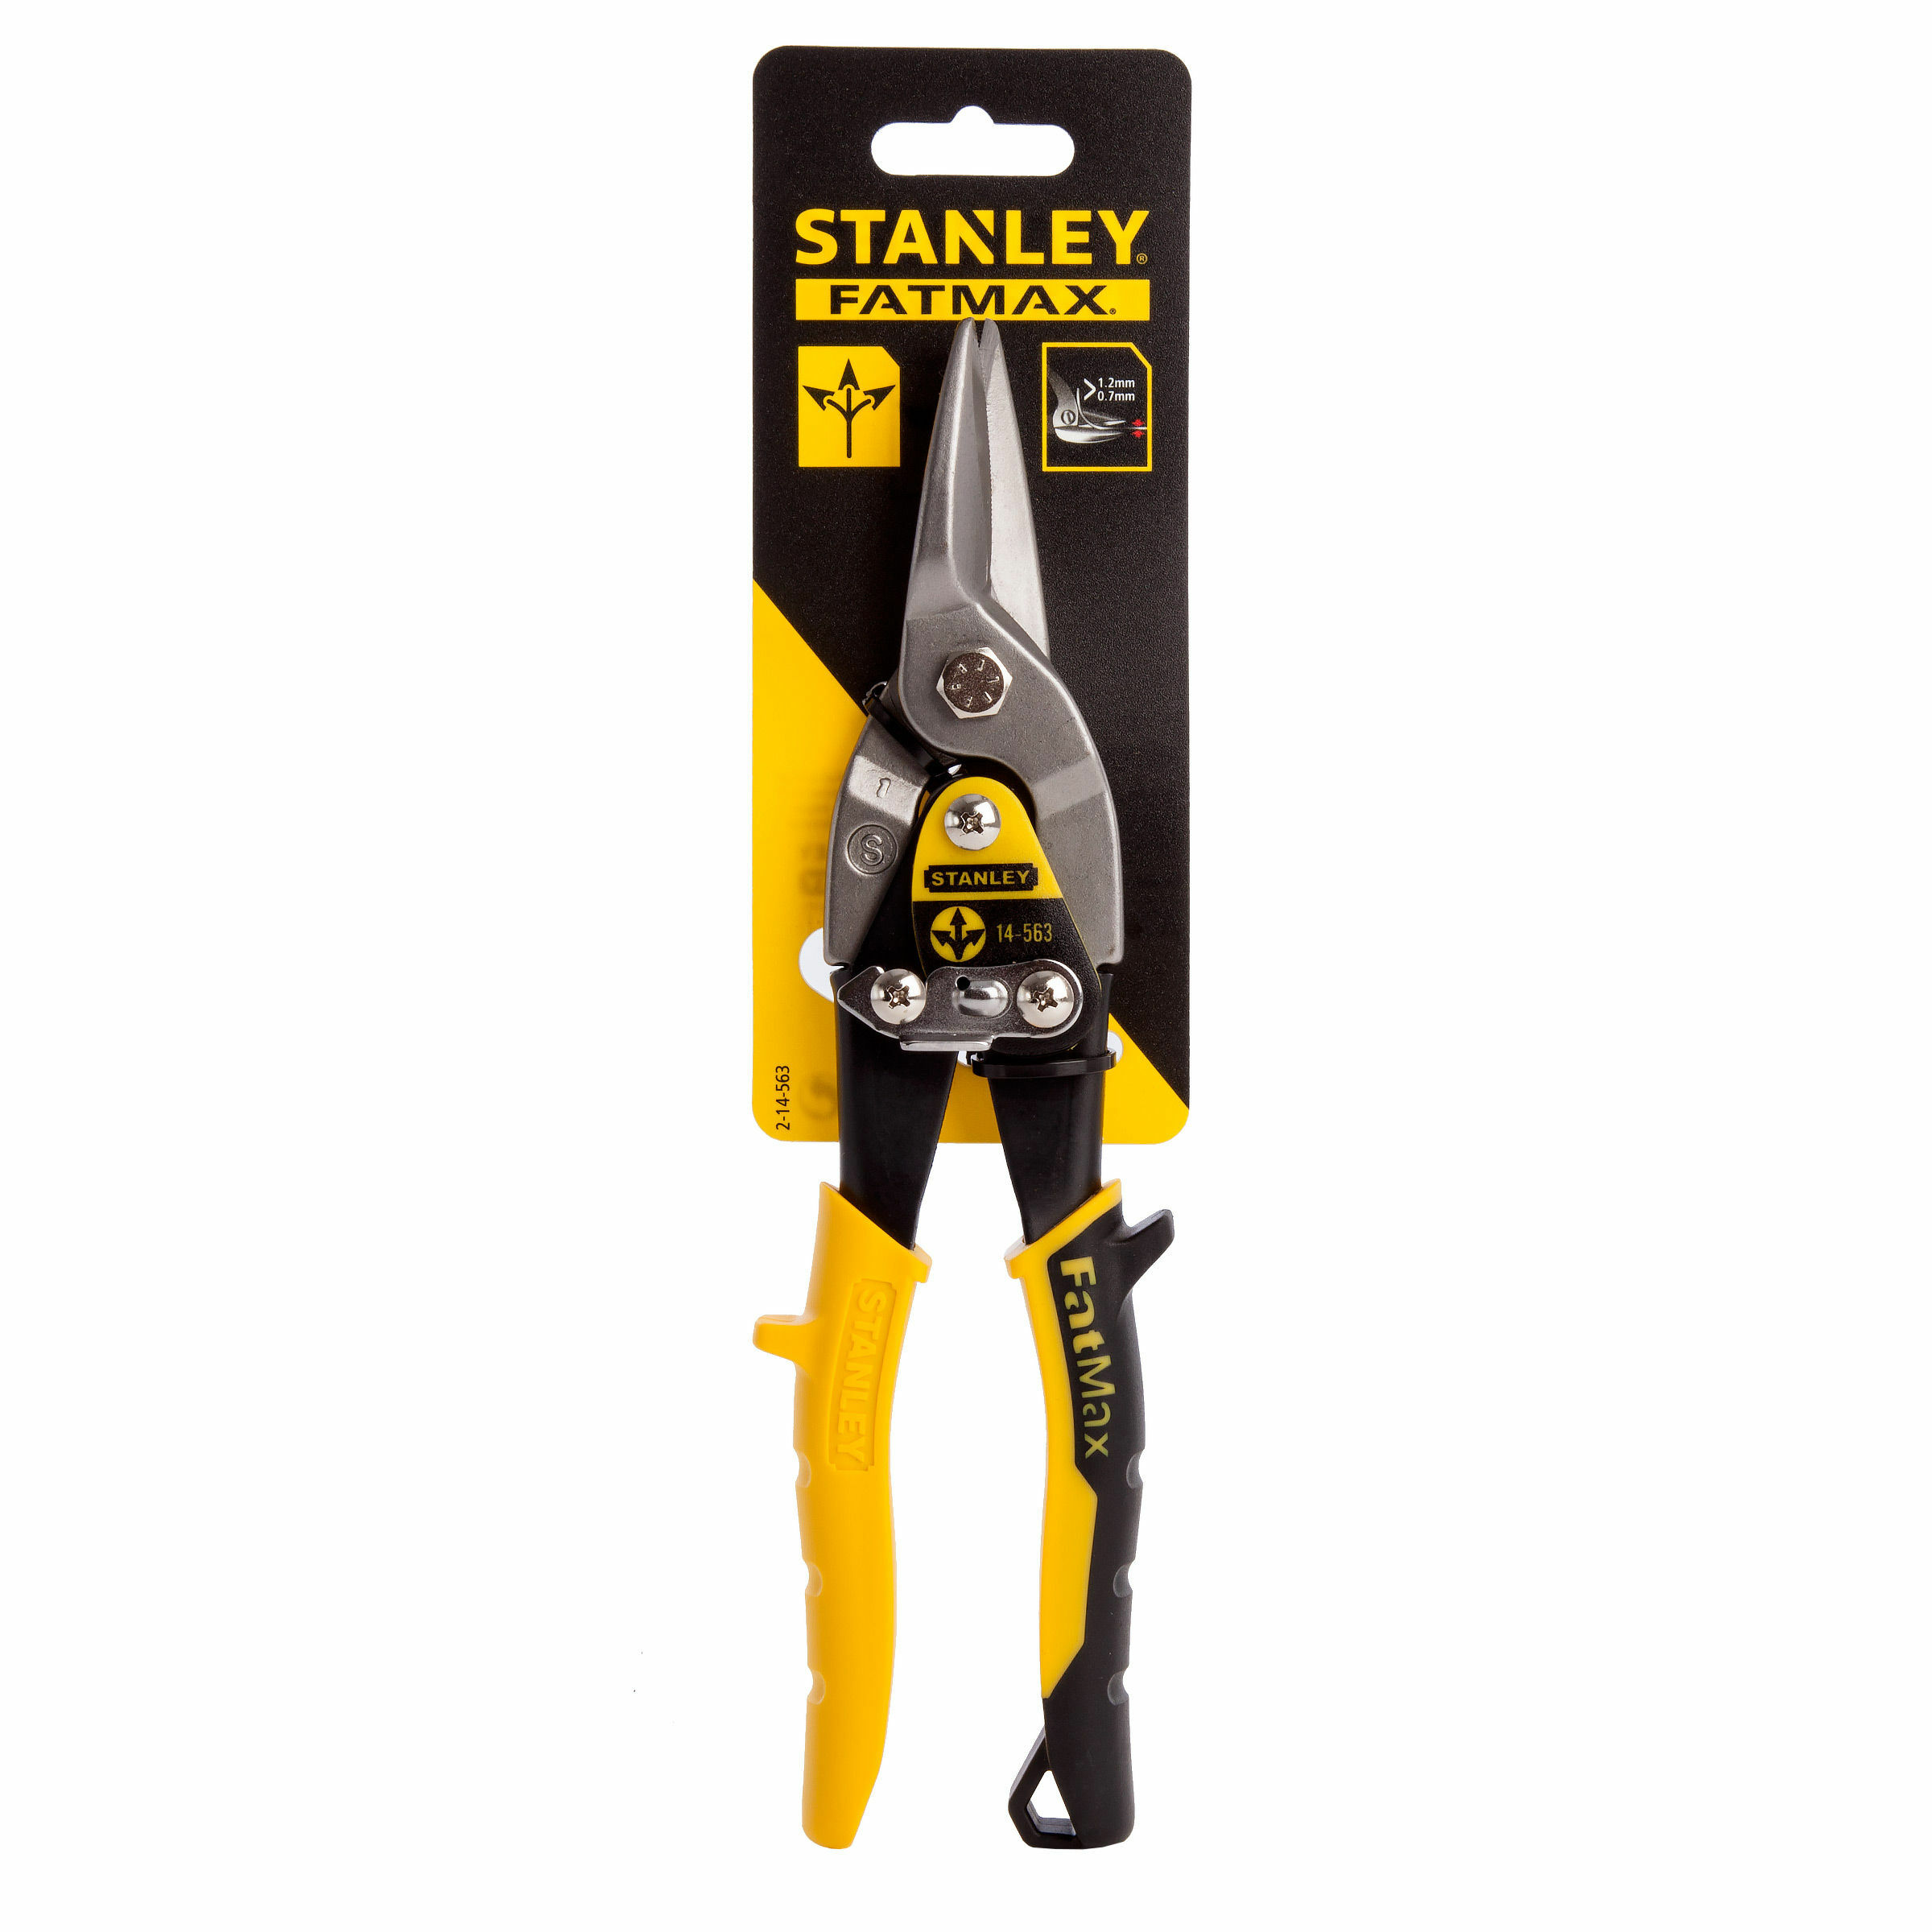 Fatmax Aviation Snip Compound Action Snips 250mm Stanley - 4